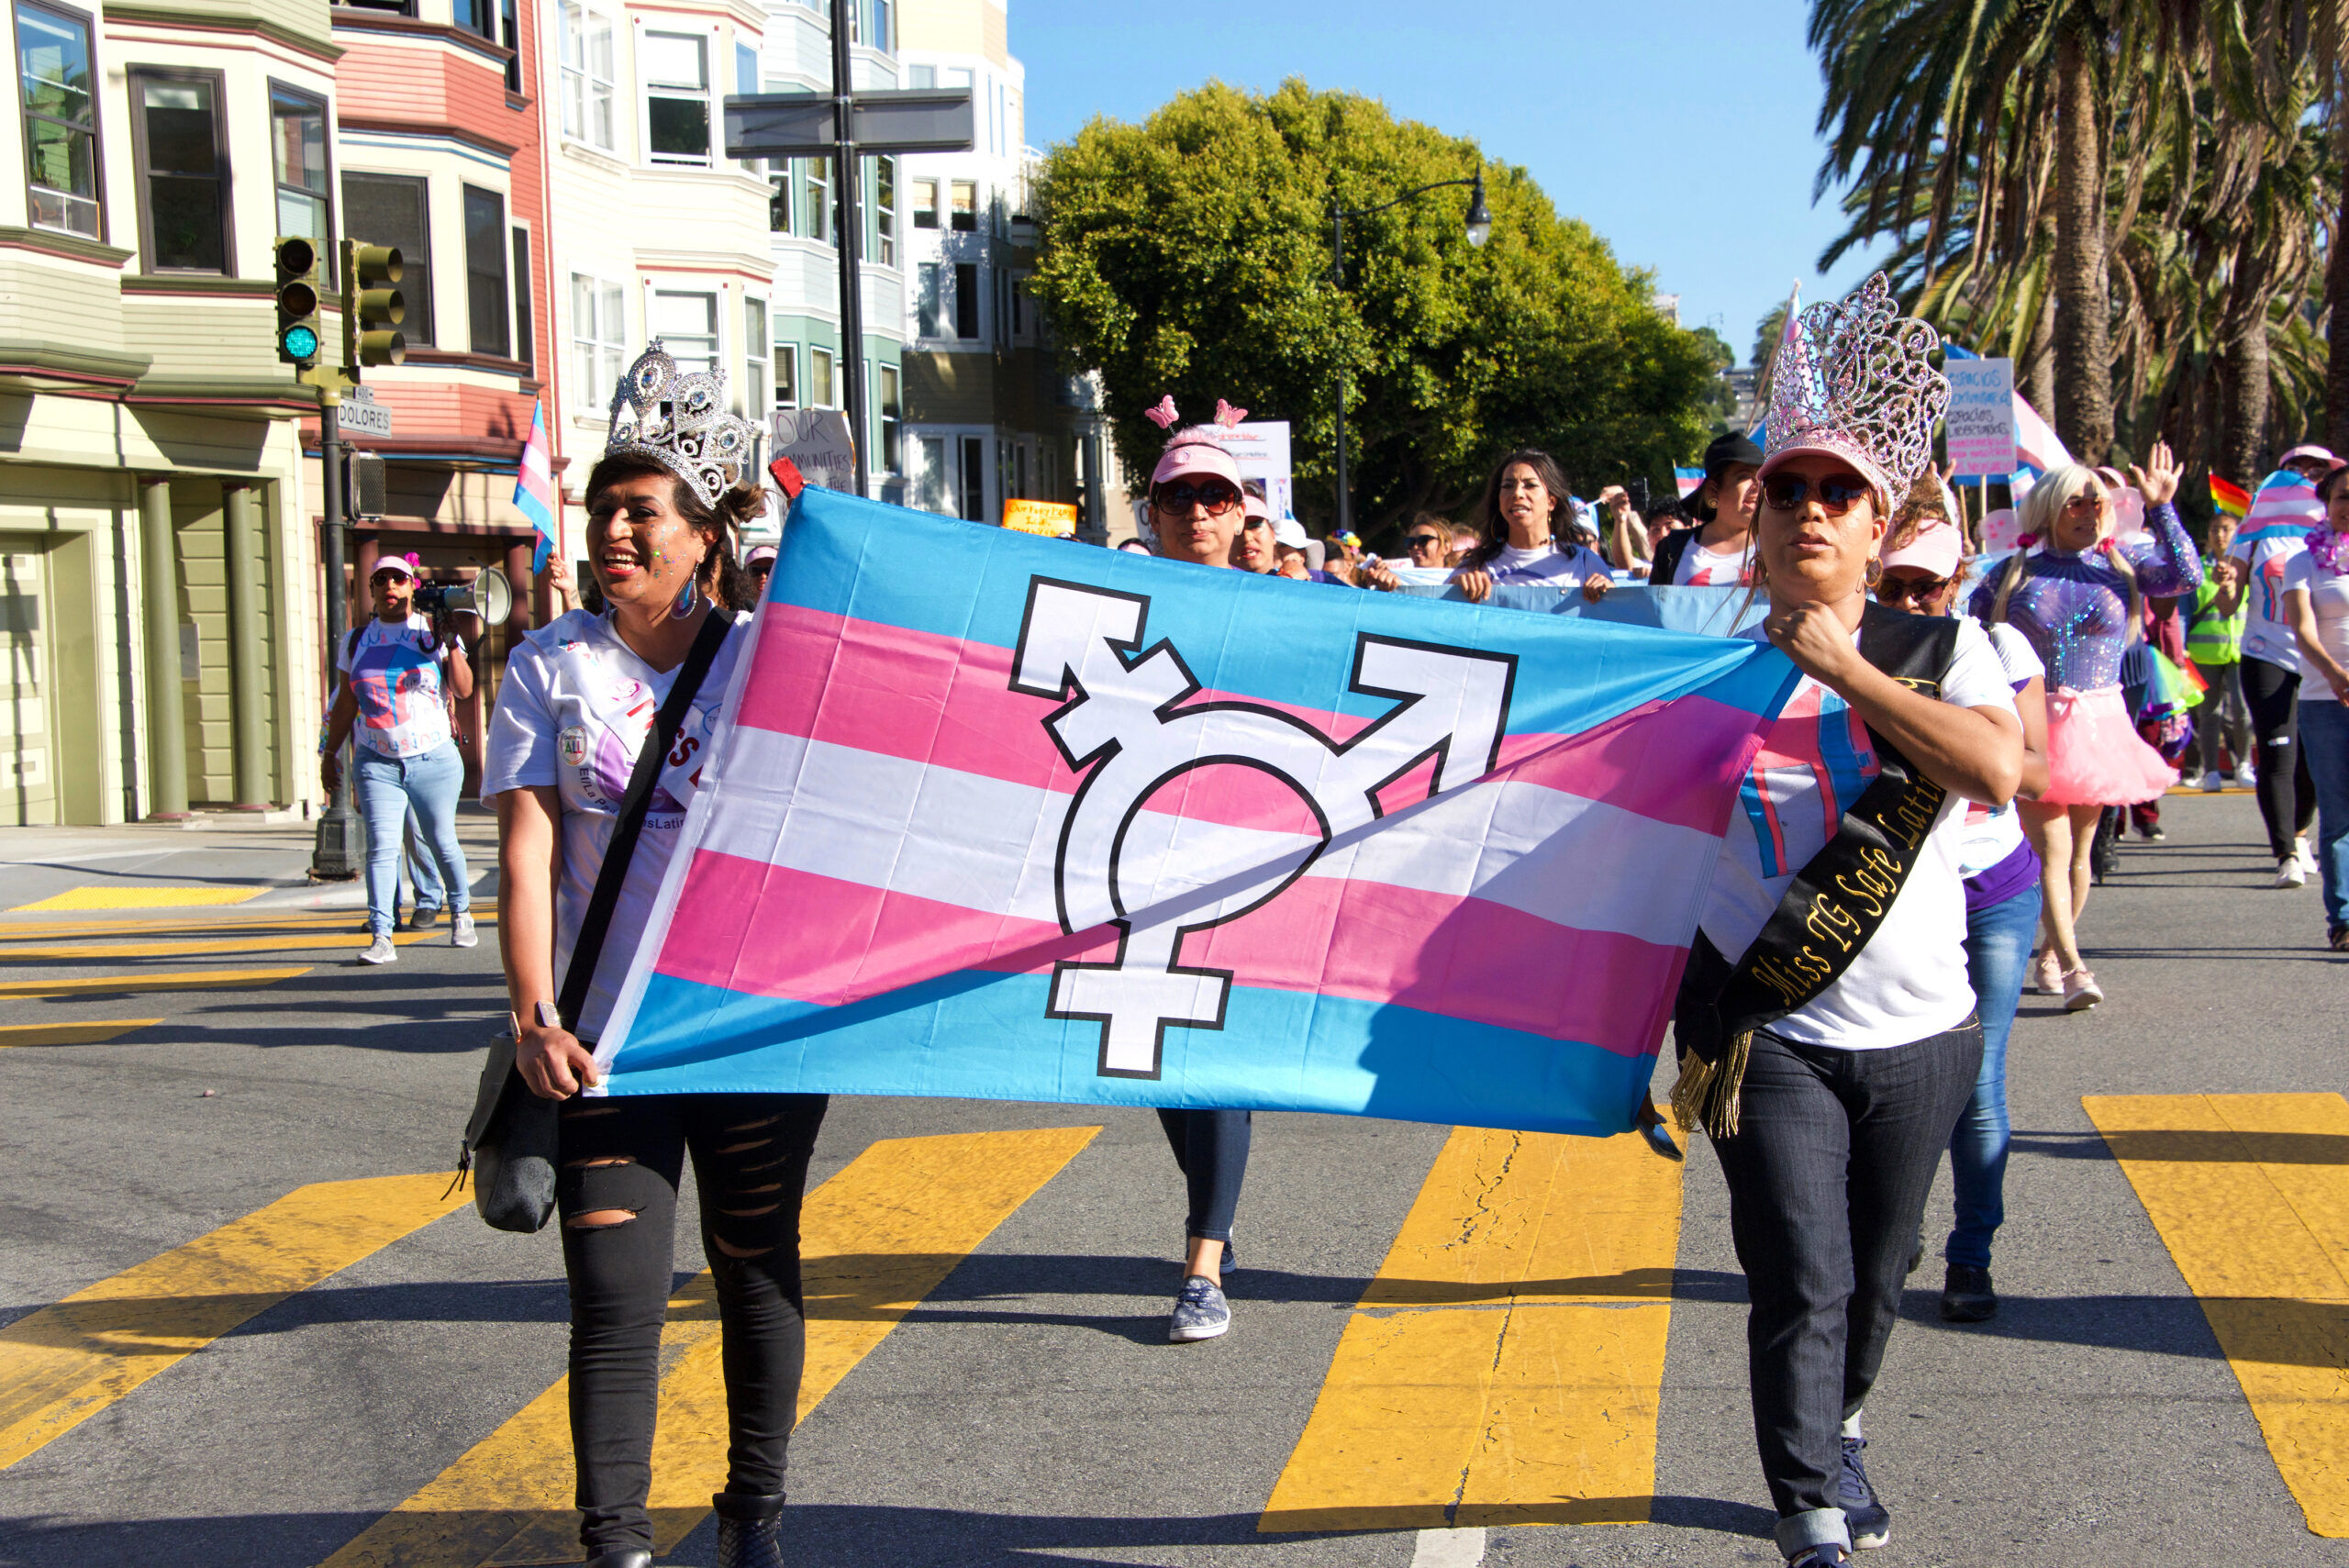 San Francisco, CA - June 28, 2019: Unidentified participants in the 16th annual Trans March, a celebration of trans and gender non-conforming people.